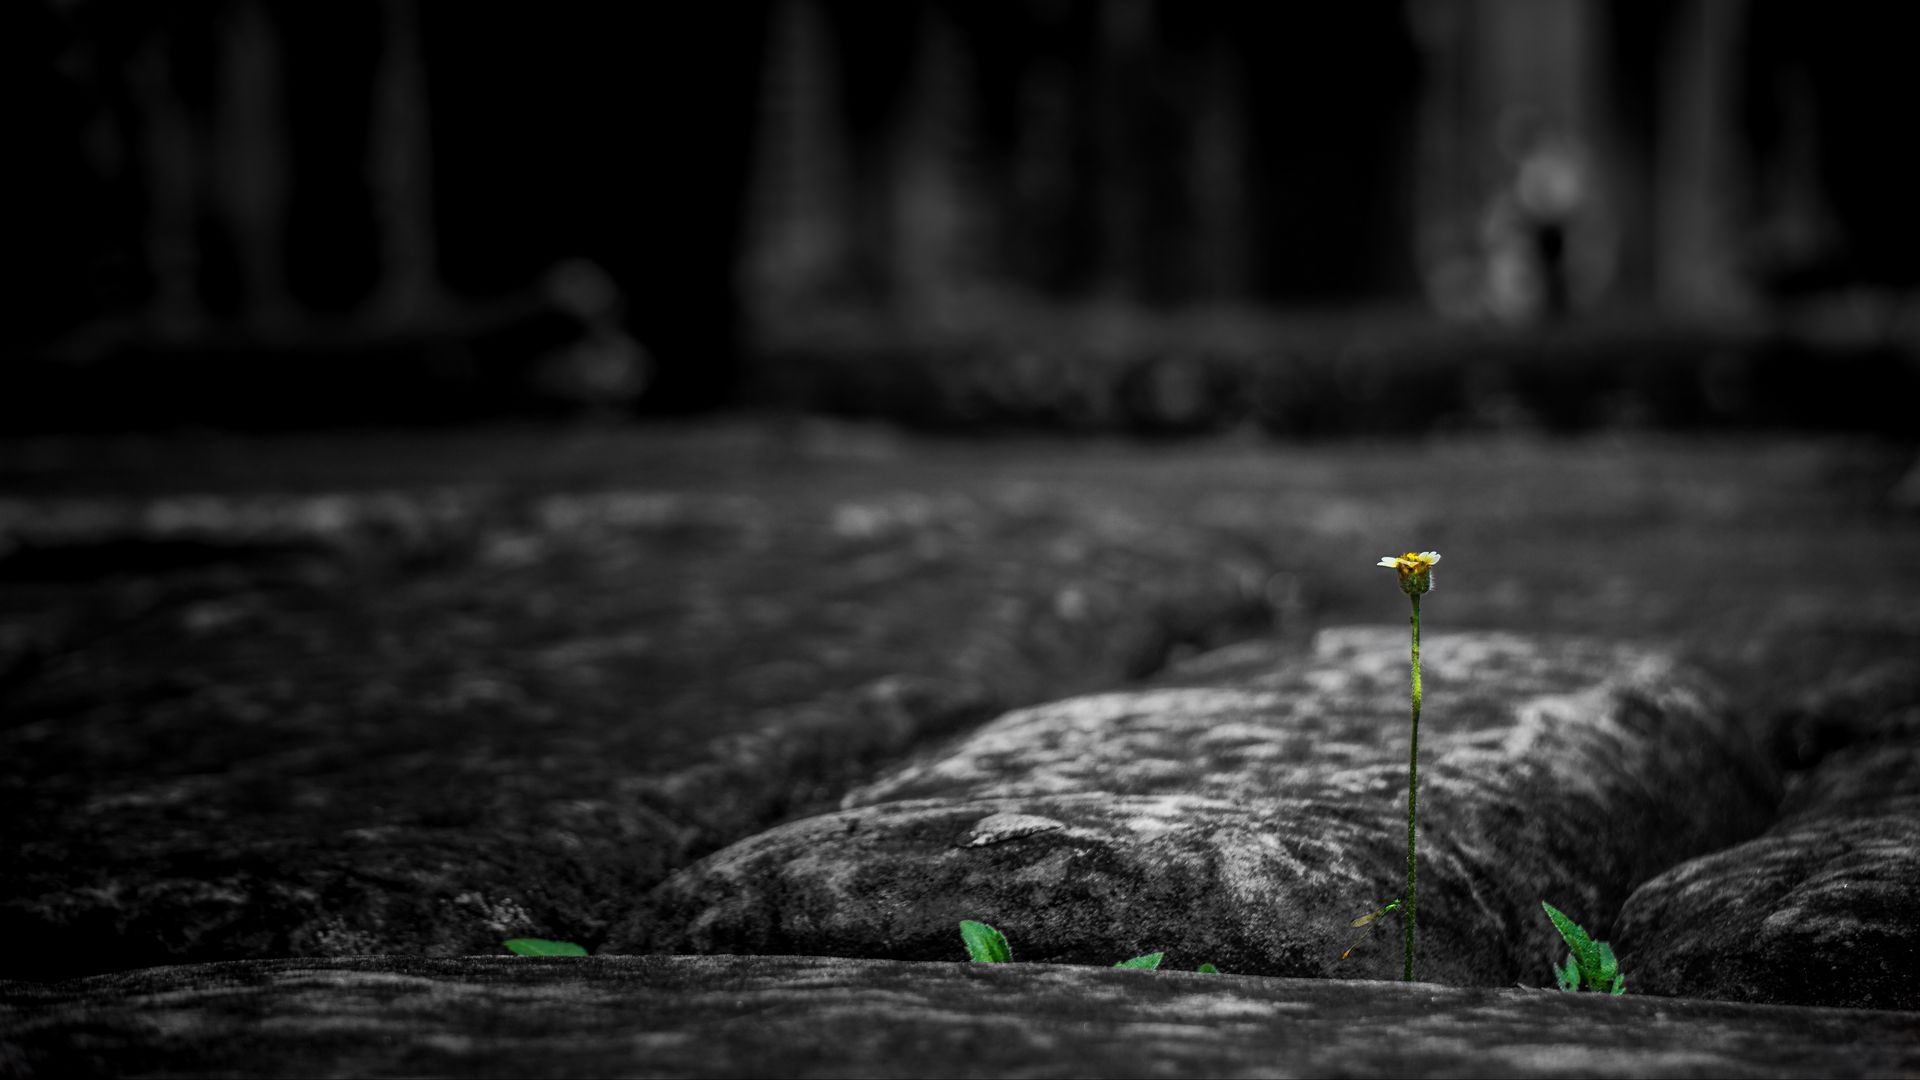 Download wallpaper 1920x1080 stone, flower, power of nature